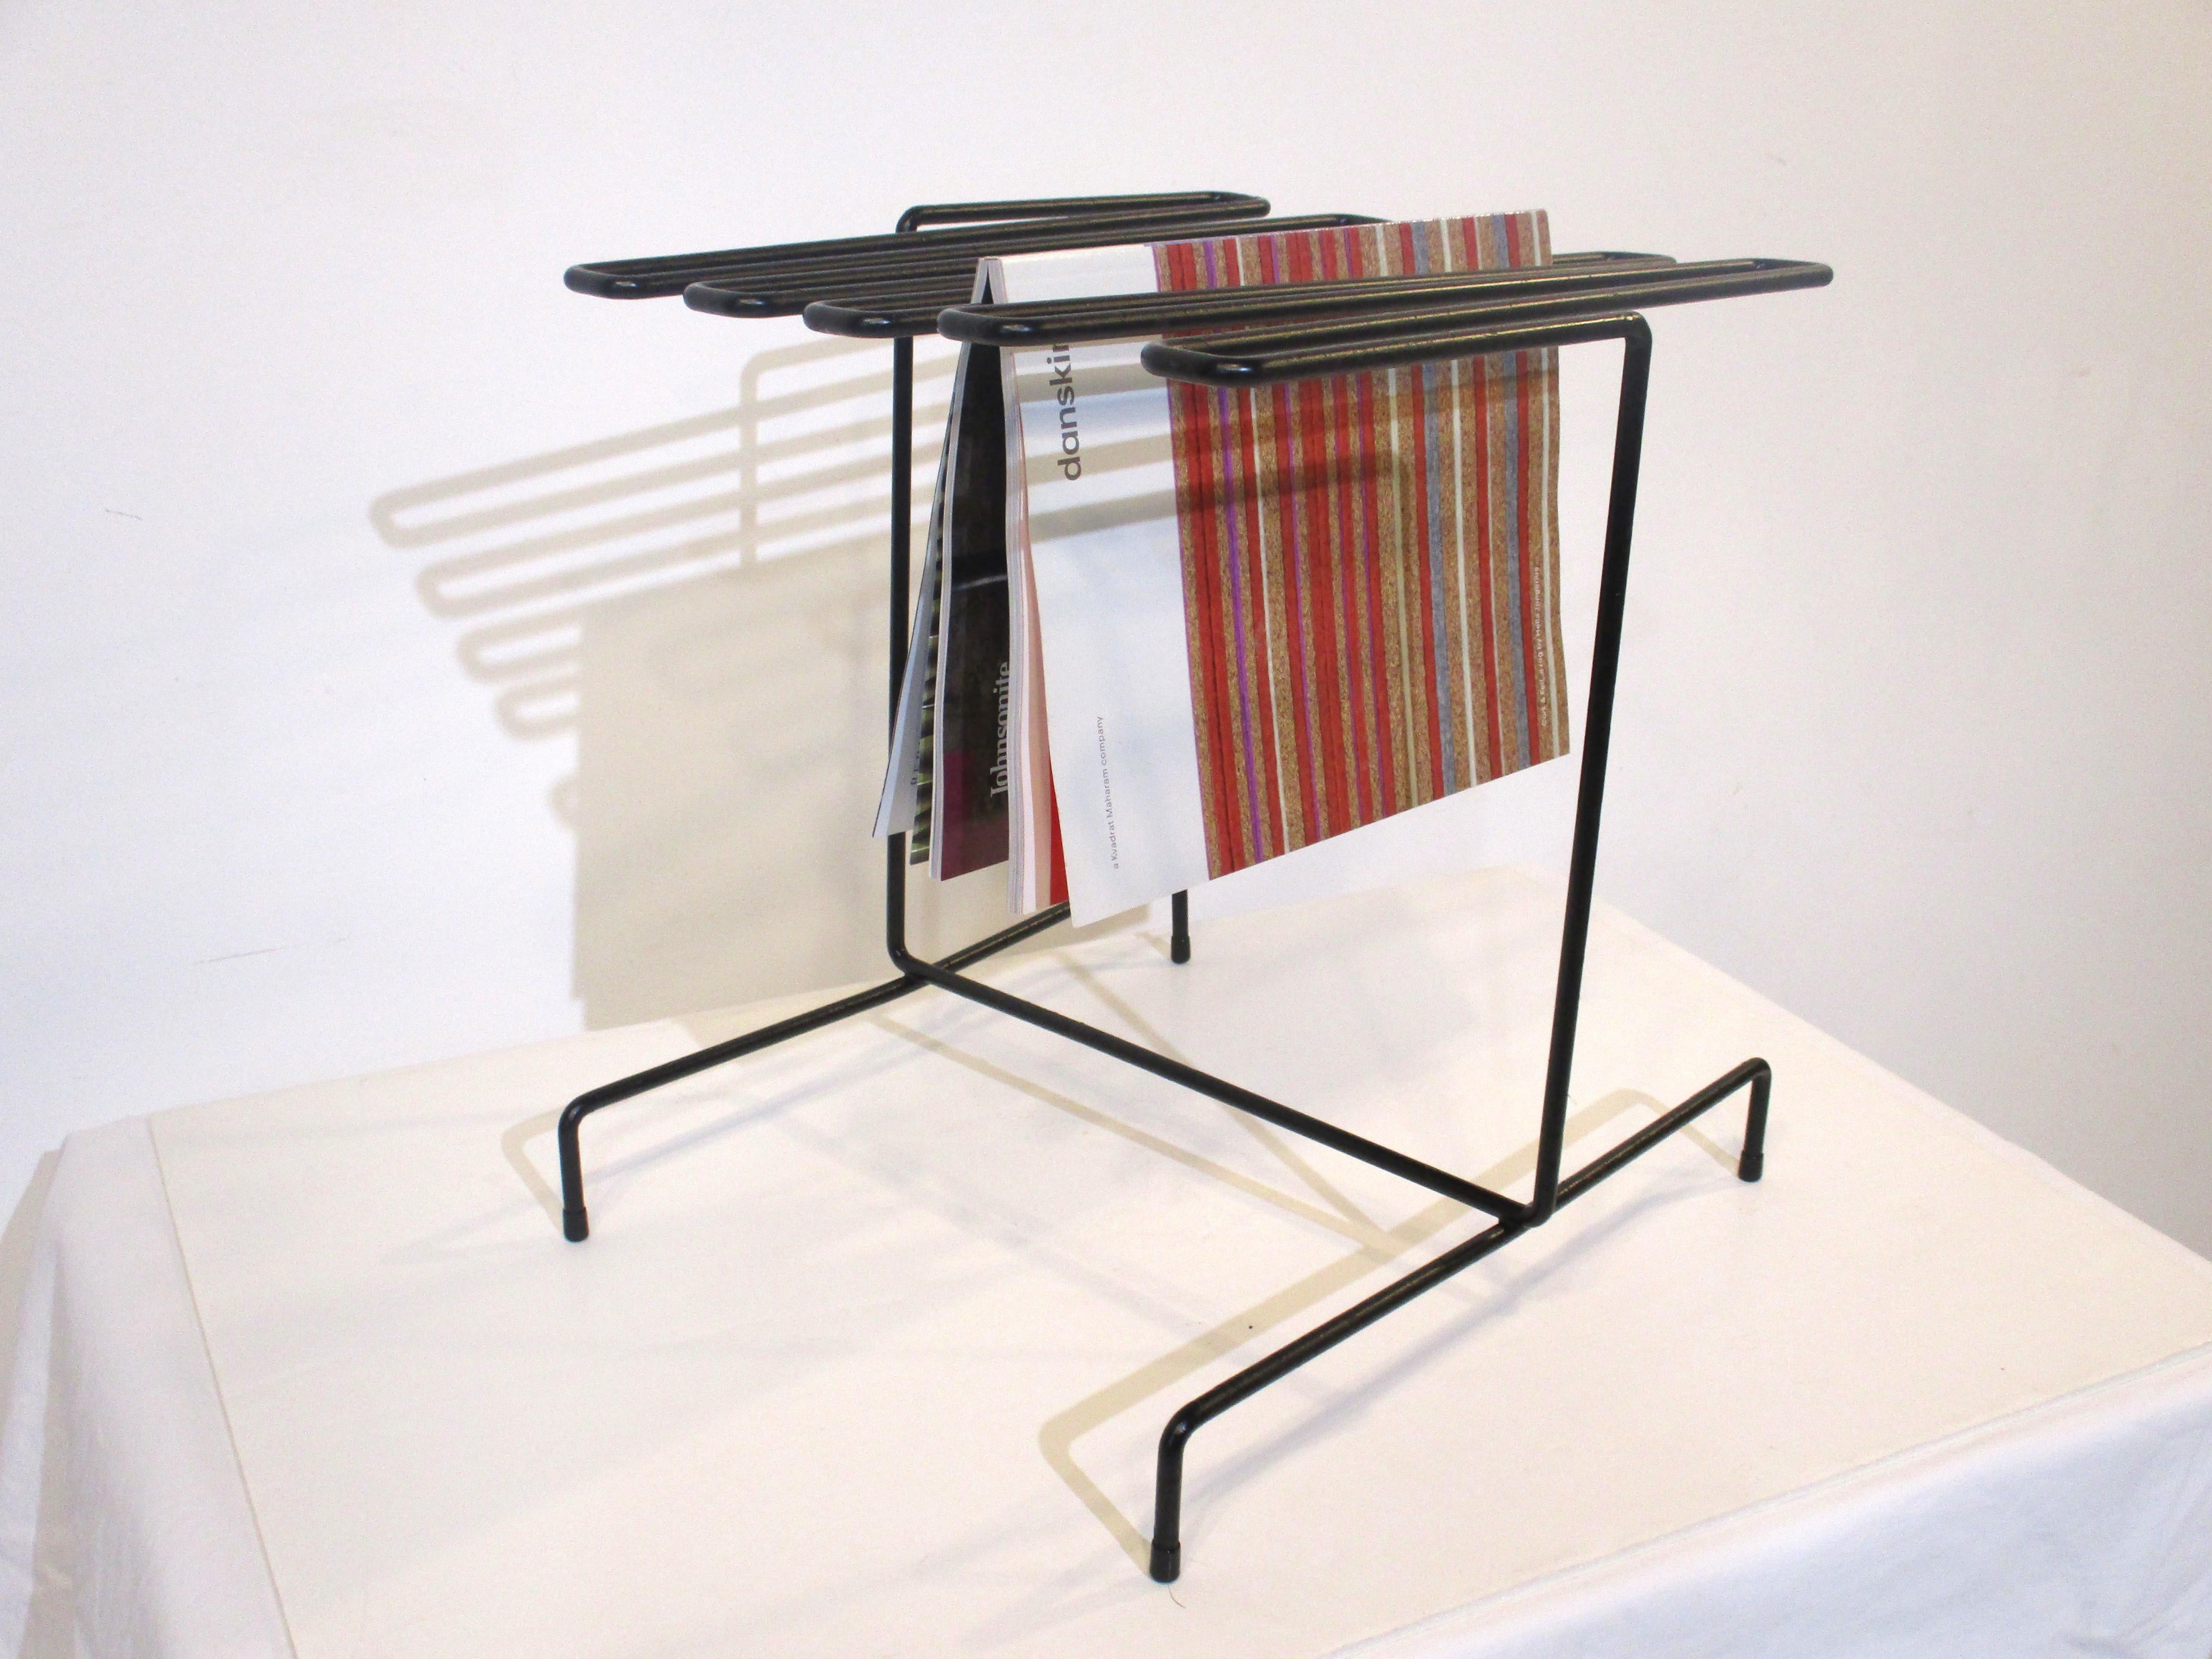 A sculptural satin black metal magazine, newspaper rack with nine hanging rods. Rubber feet are on the base to protect your floor and for stability designed and manufactured in the manner of Tony Paul, a simple form that is very practical.